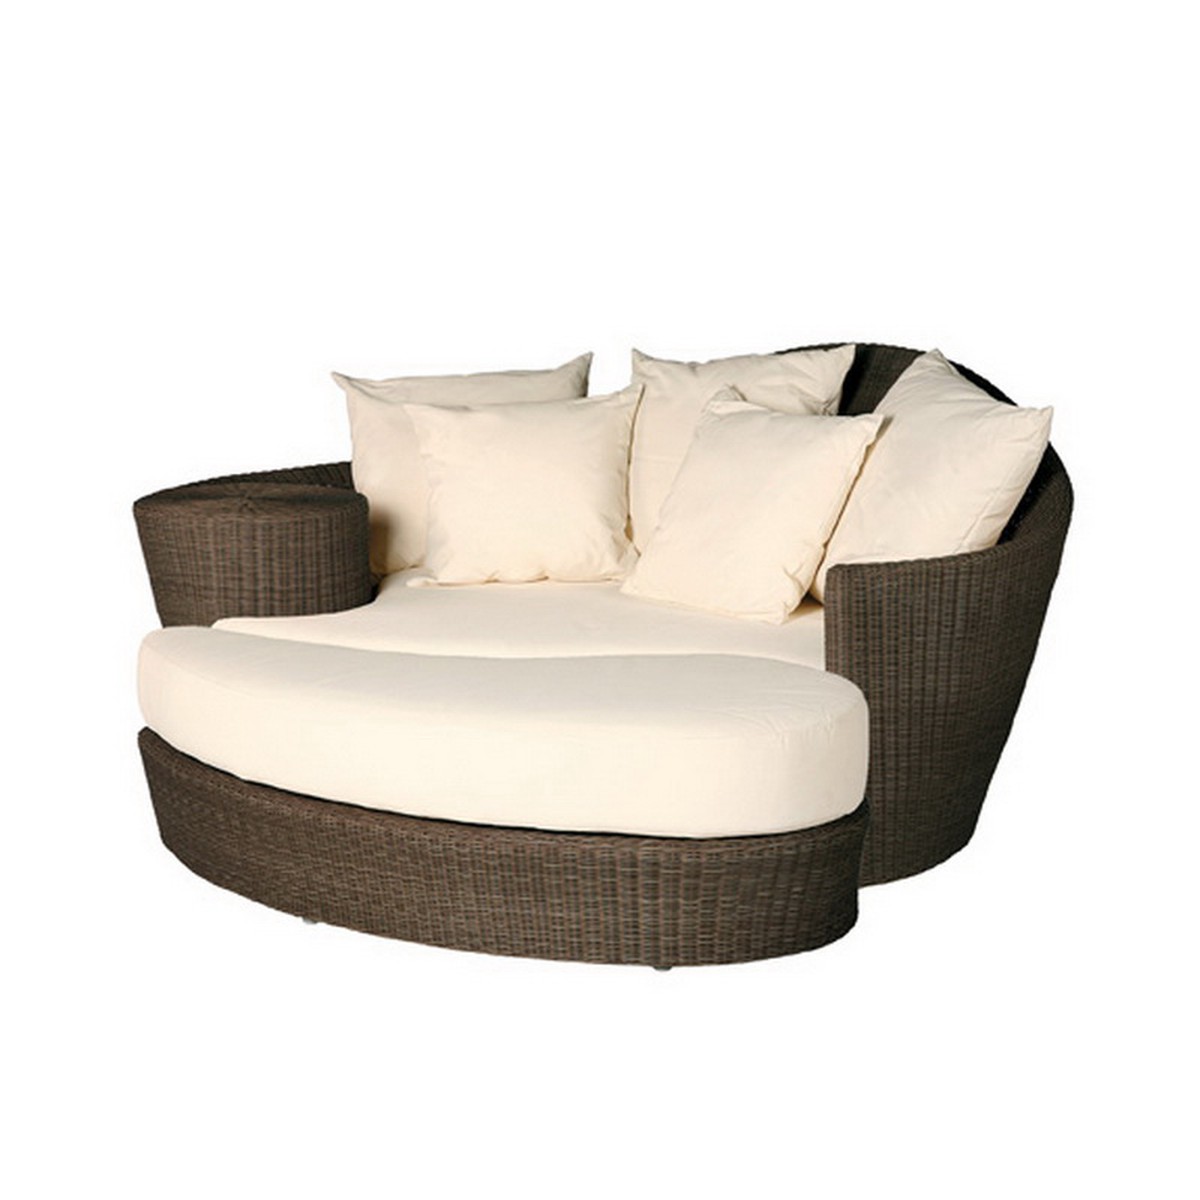 Barlow Tyrie Dune Ensemble Dune Daybed & Repose pied Java inclus coussins 800035/ 800070/800050 Vert tilleul 